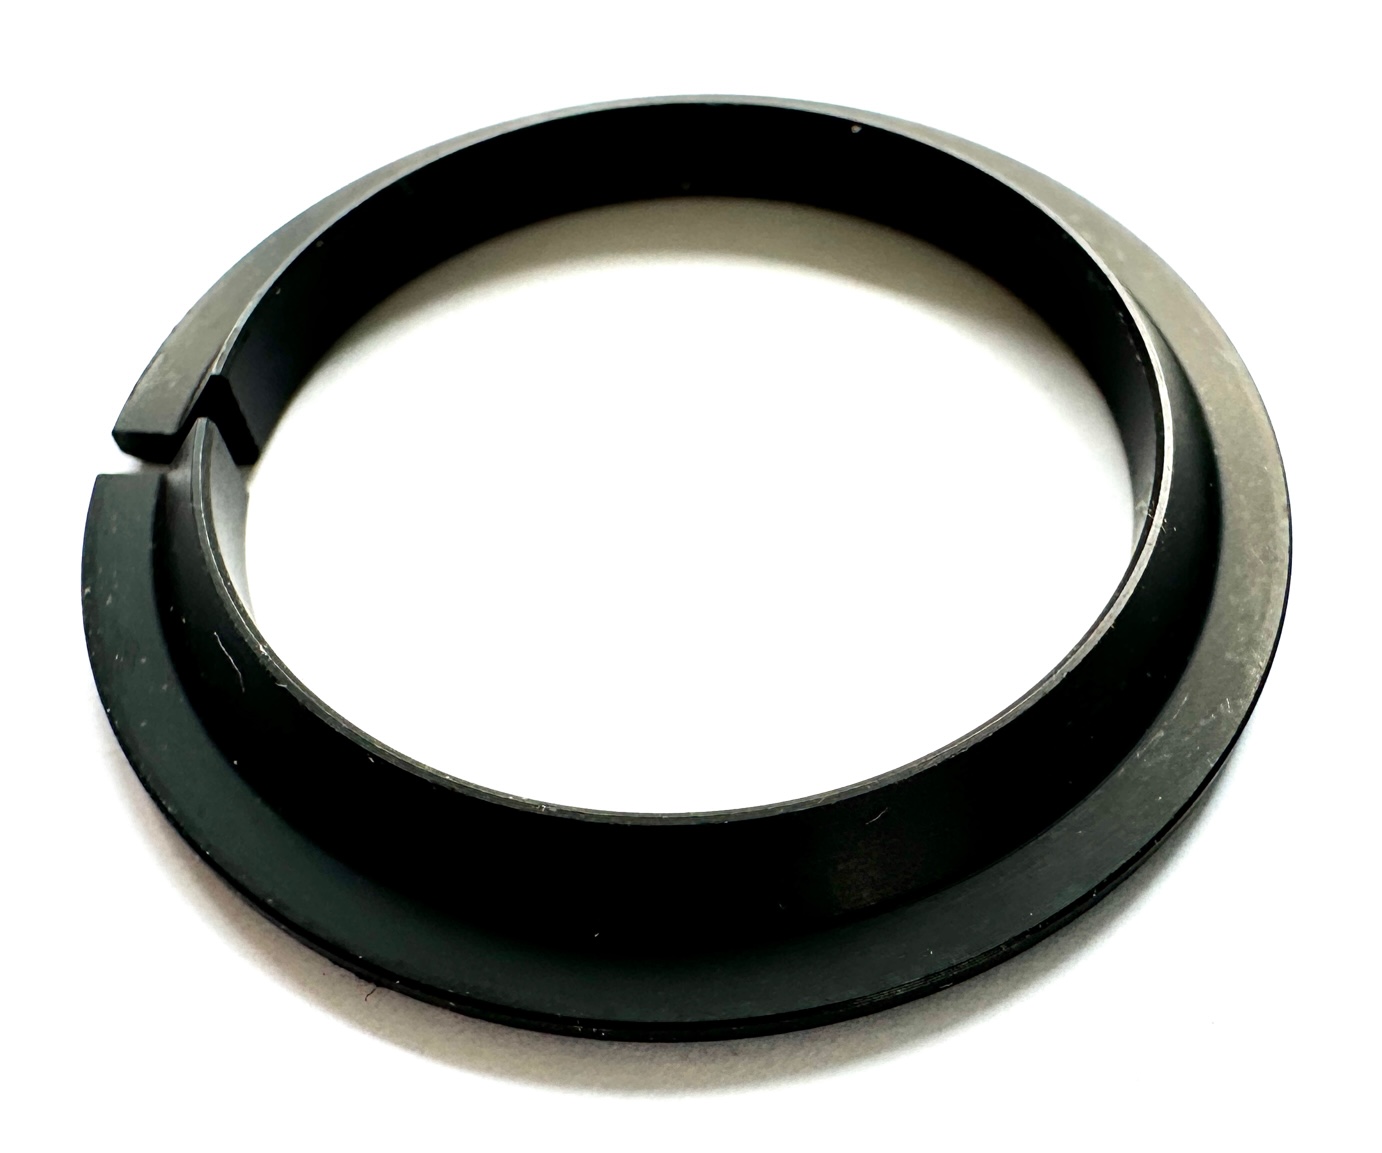 FSA fork cone H6036 for headsets of 1 1/8 inch.